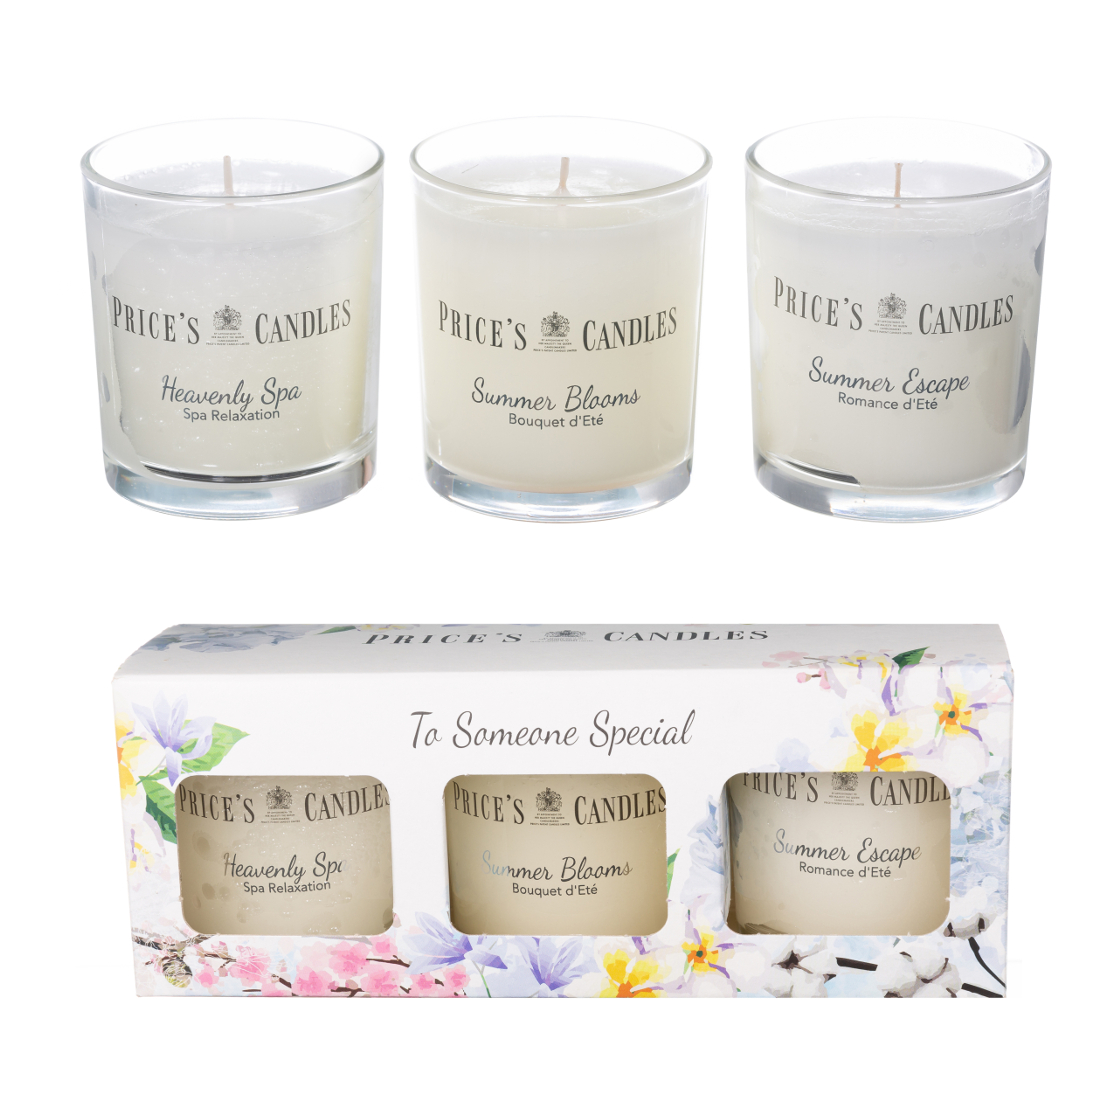 Prices Candles To Someone Special Gift Set